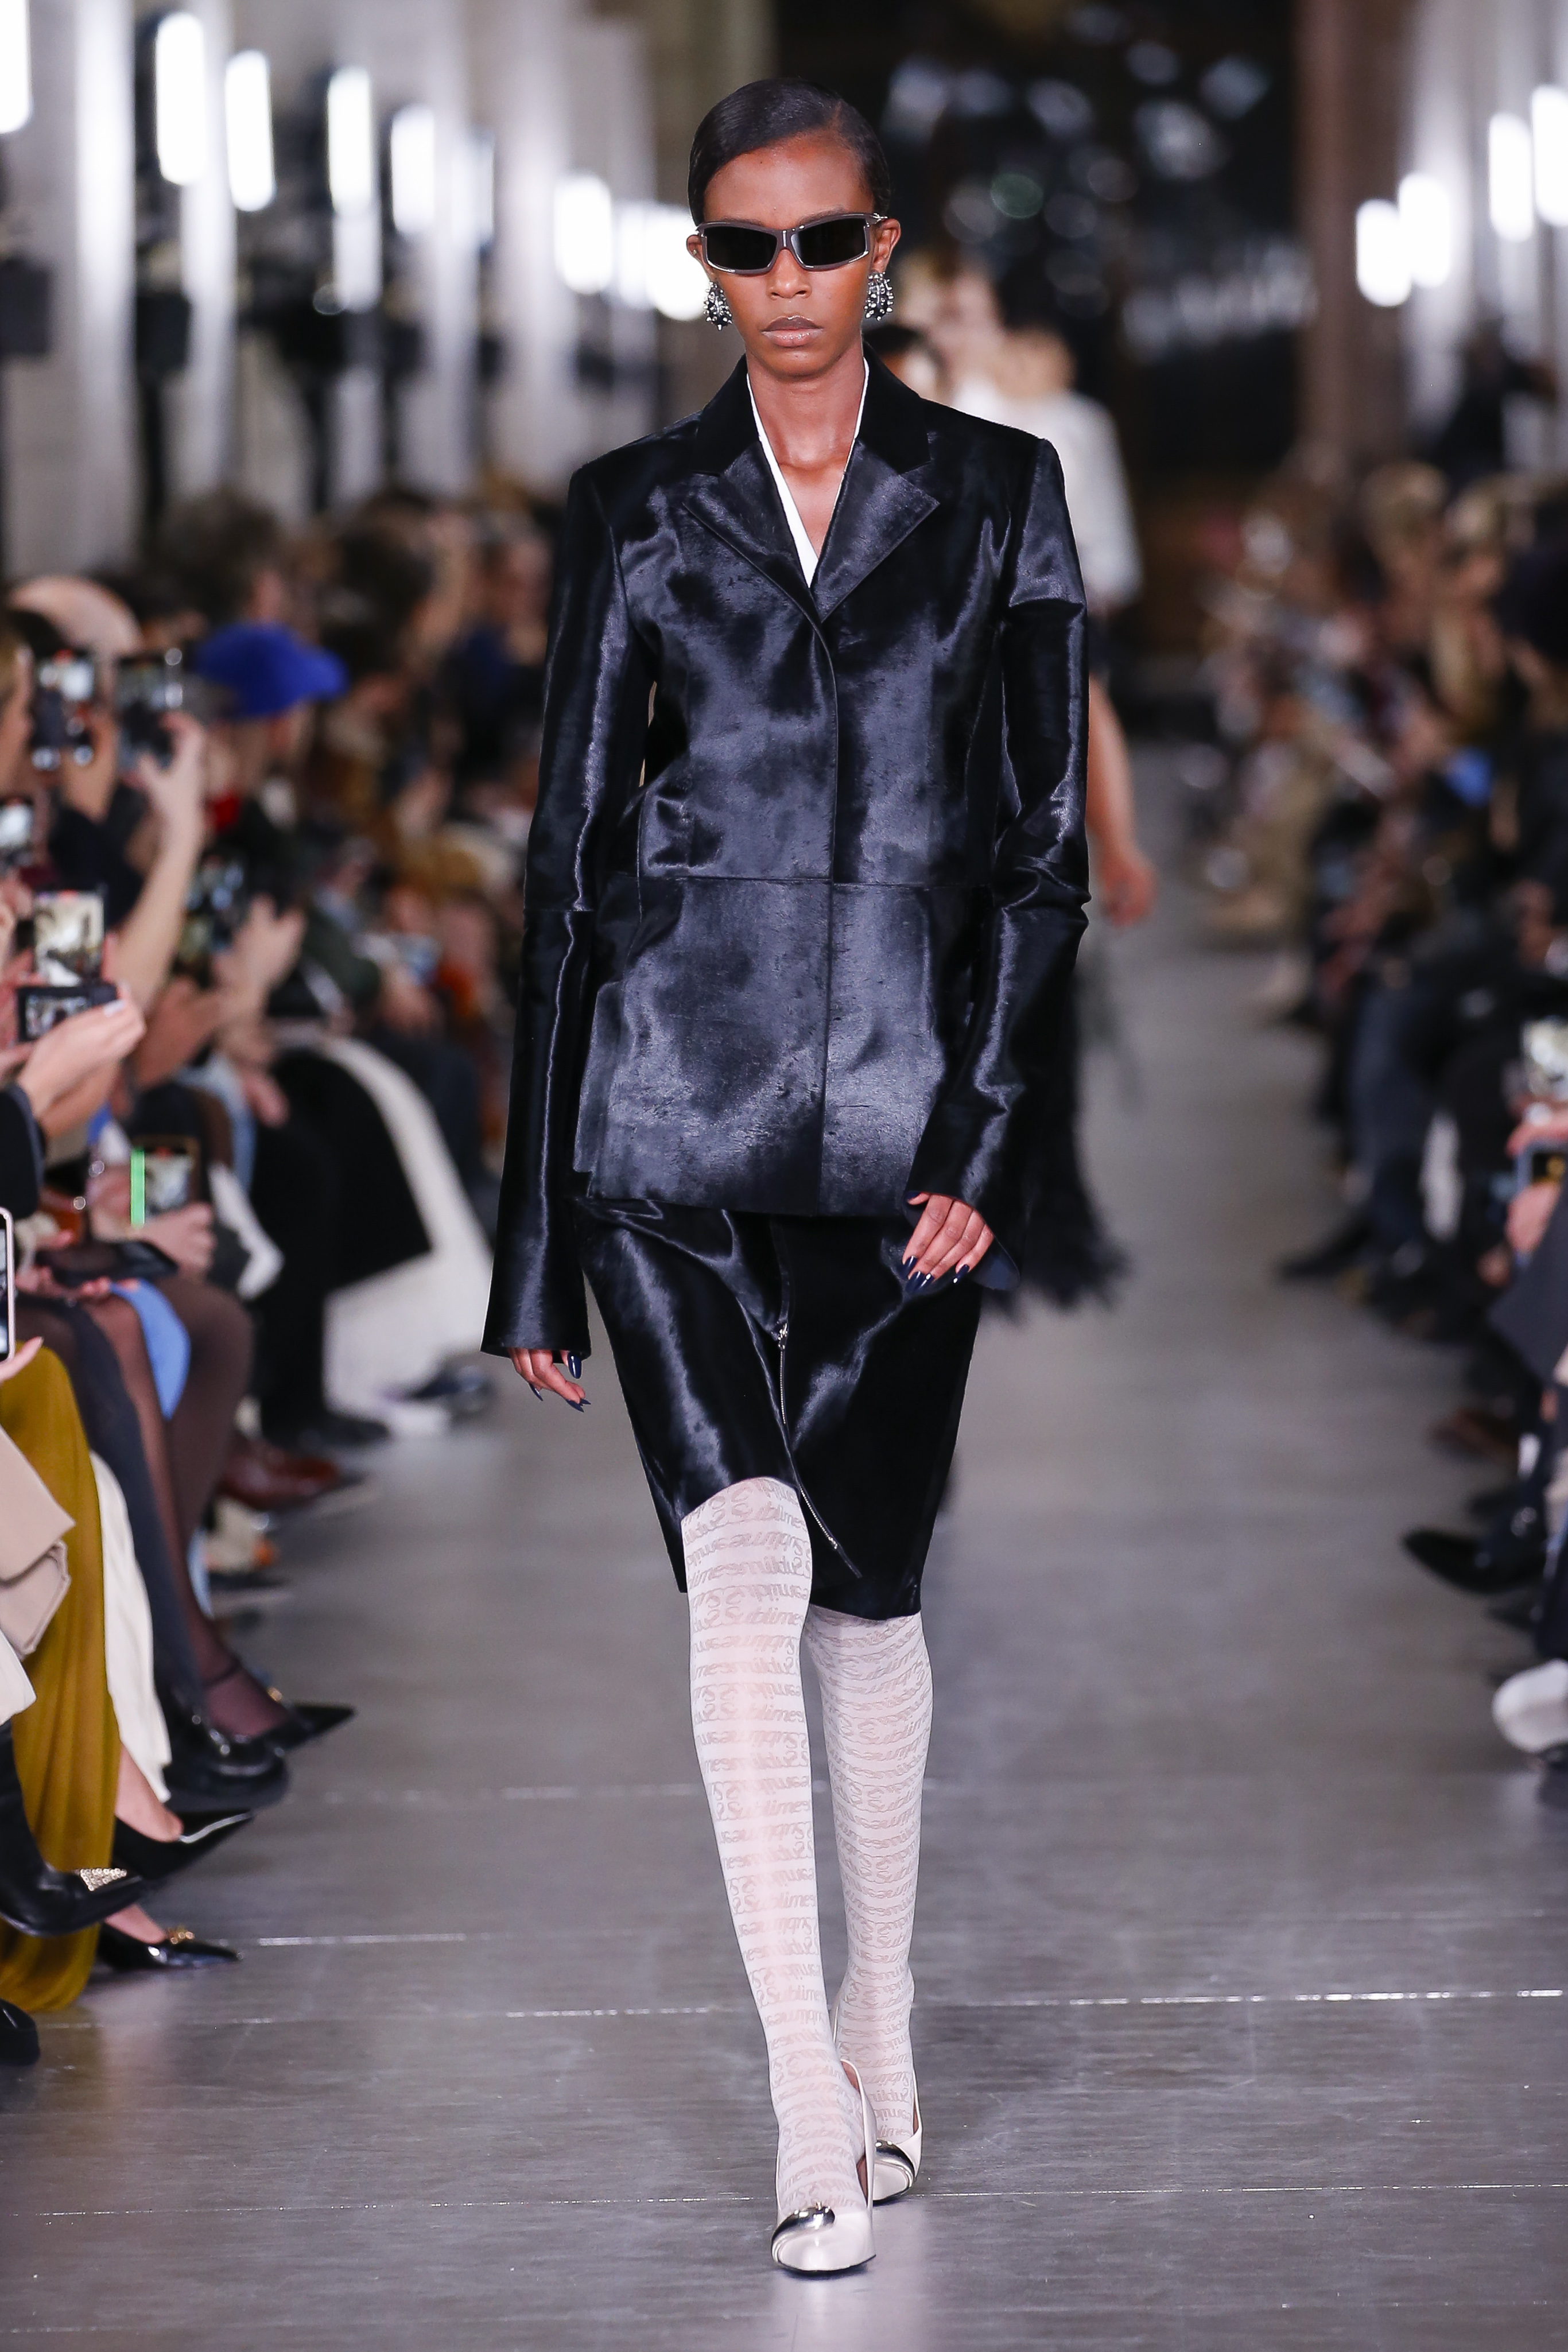 A Tory Burch model wearing a velvet black jacket and matching pencil skirt with white tights at the FW24 show.